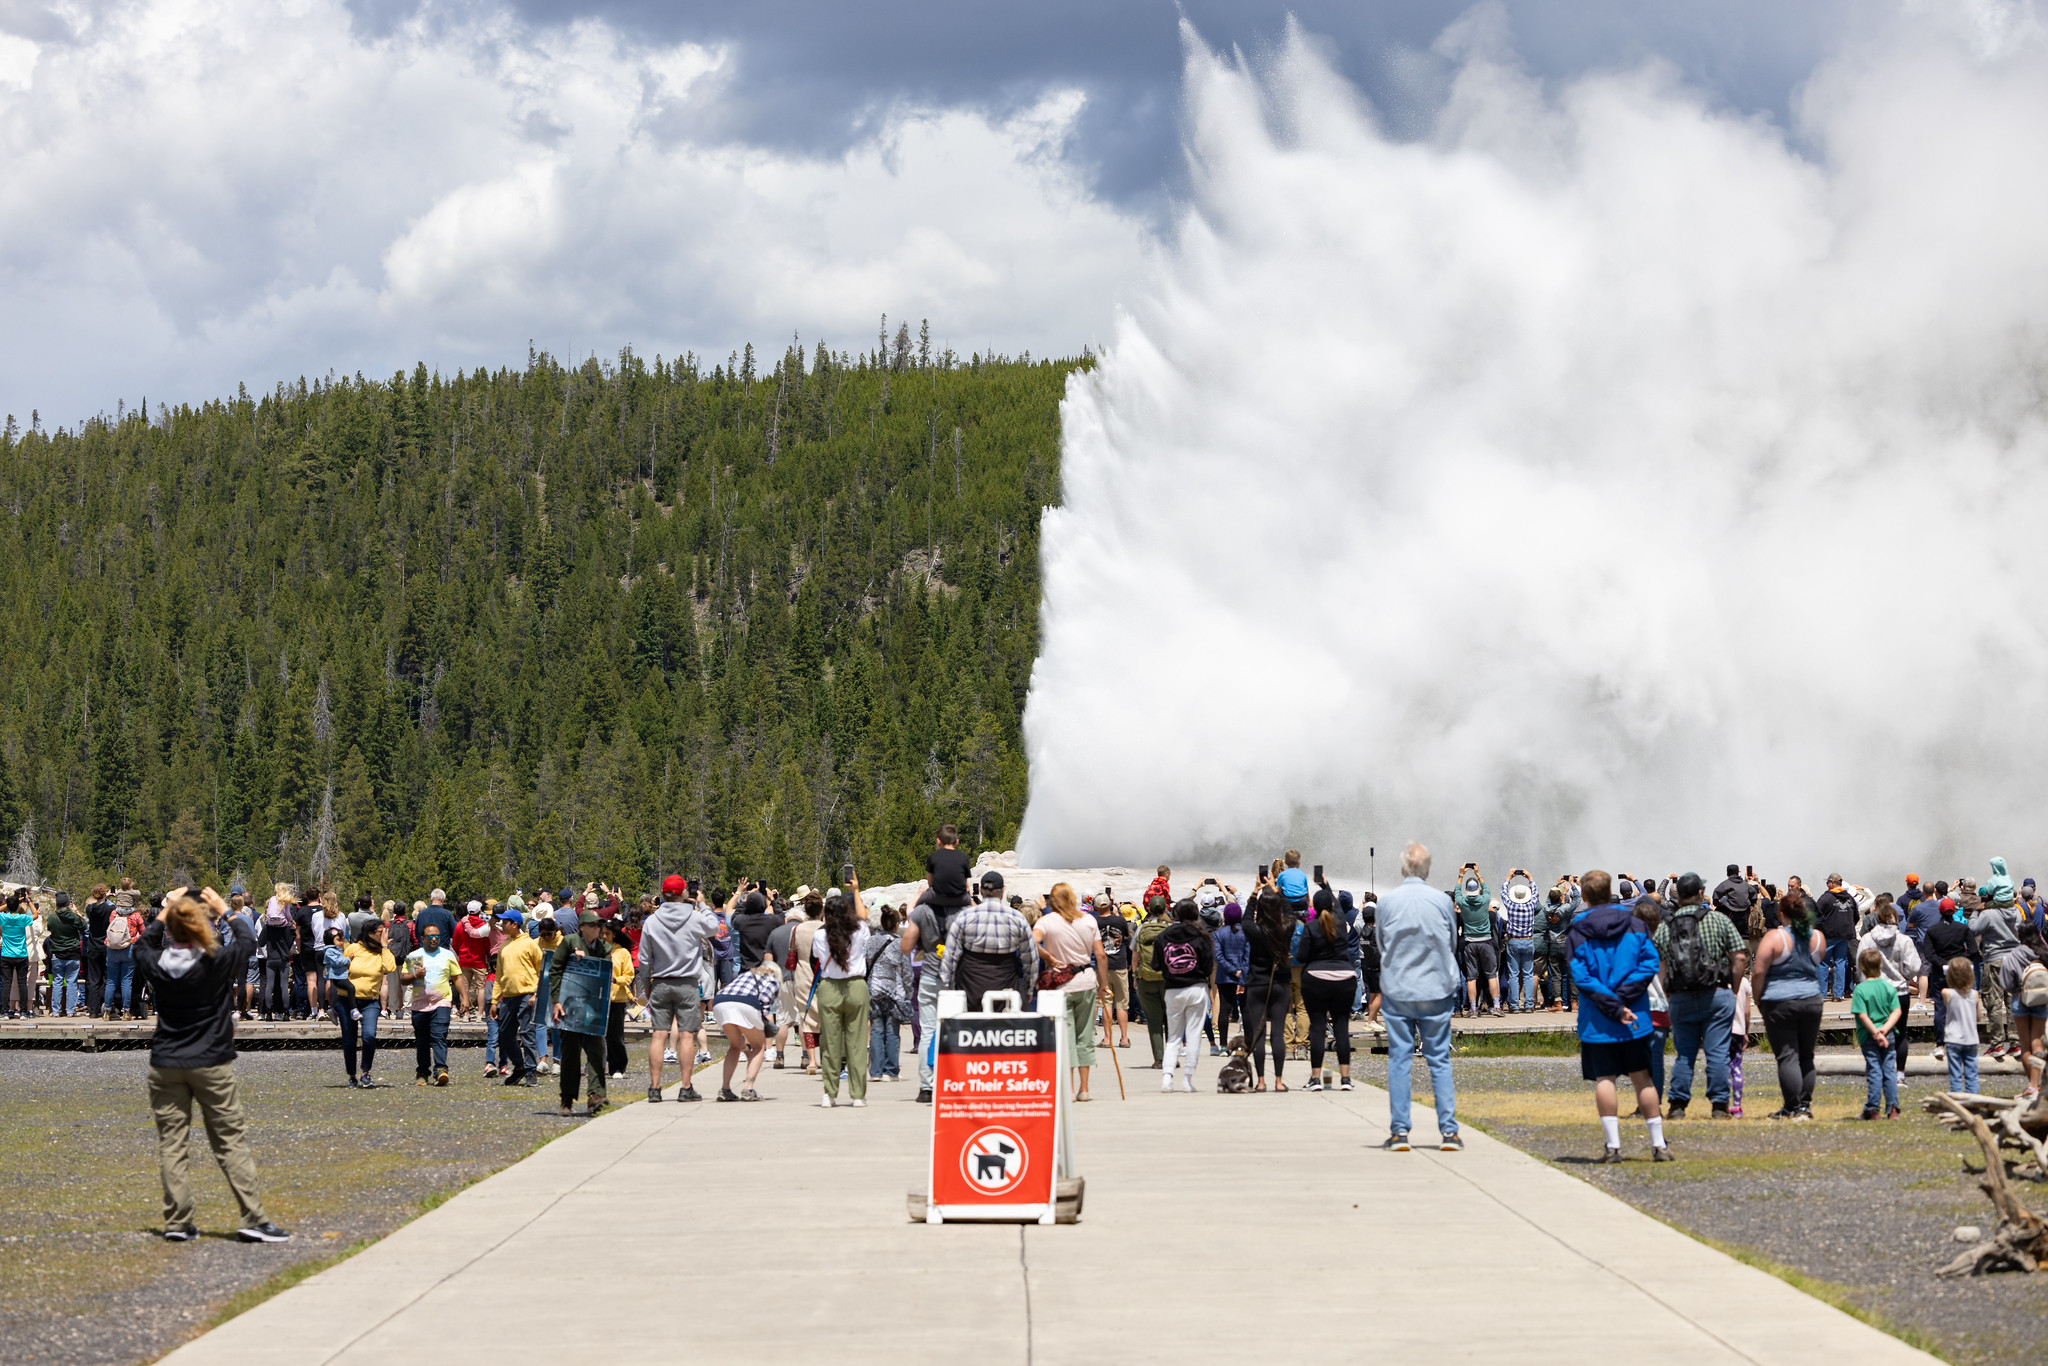 Yellowstone National ParkFollow Holiday crowds at Old Faithful eruption